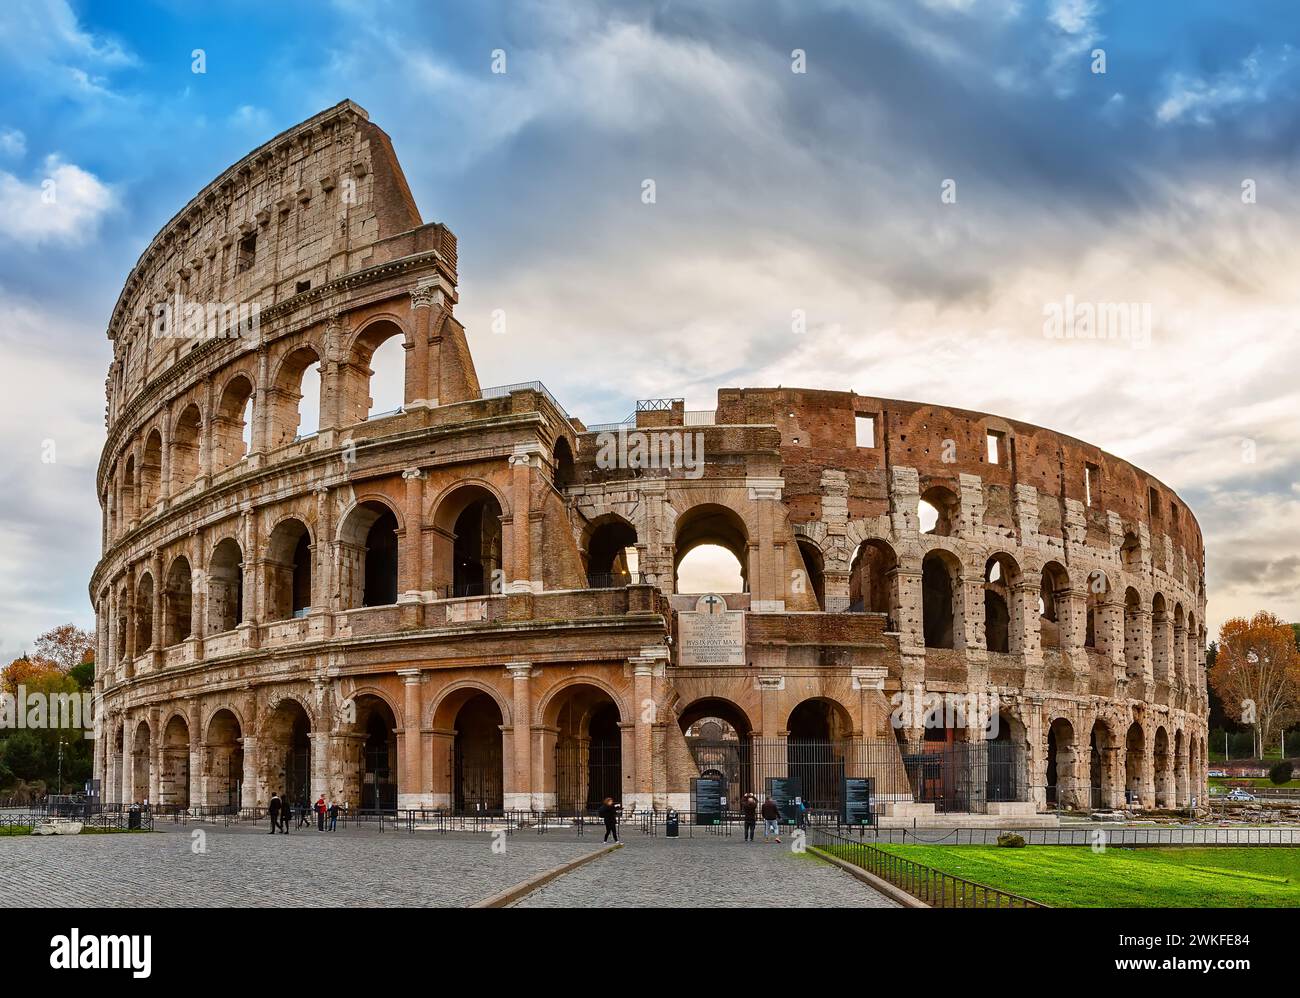 Colosseum (Coliseum) is one of main travel attraction of Rome in Italy. Ancient Roman ruins, landscape of old Rome city. Stock Photo